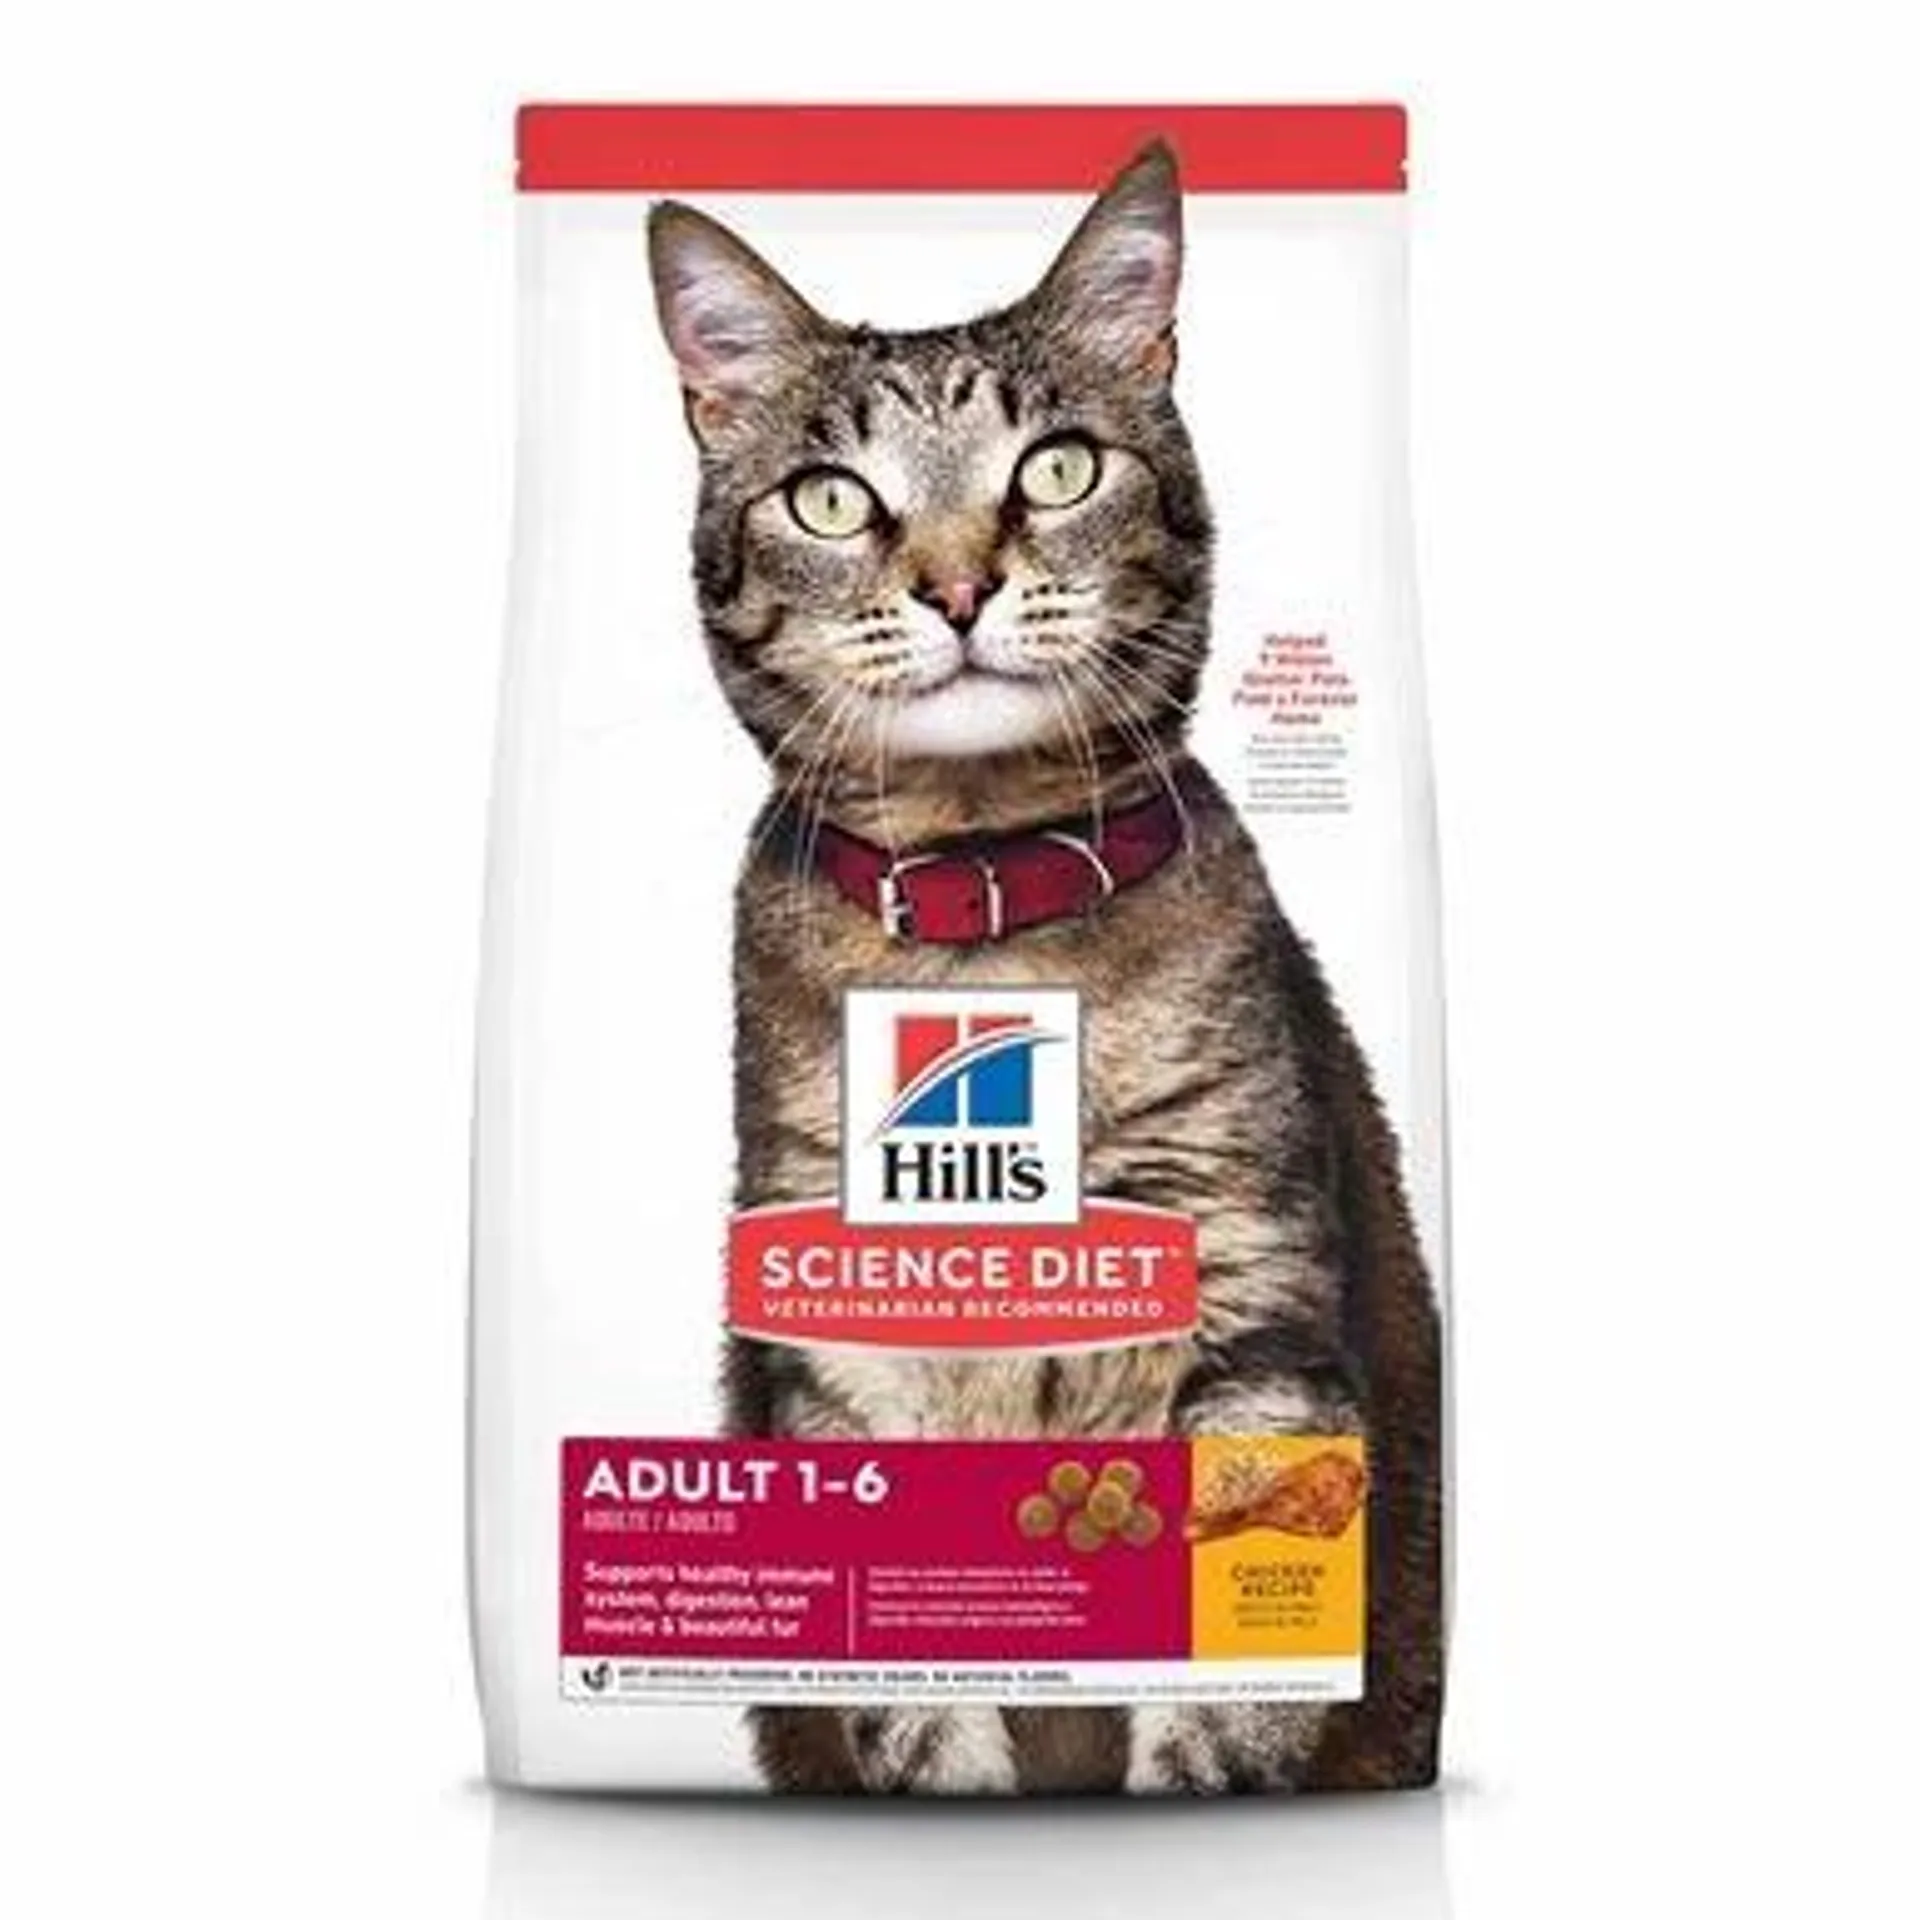 Hill's® Science Diet® Adult Optimal Care®, 16 Pound Bag